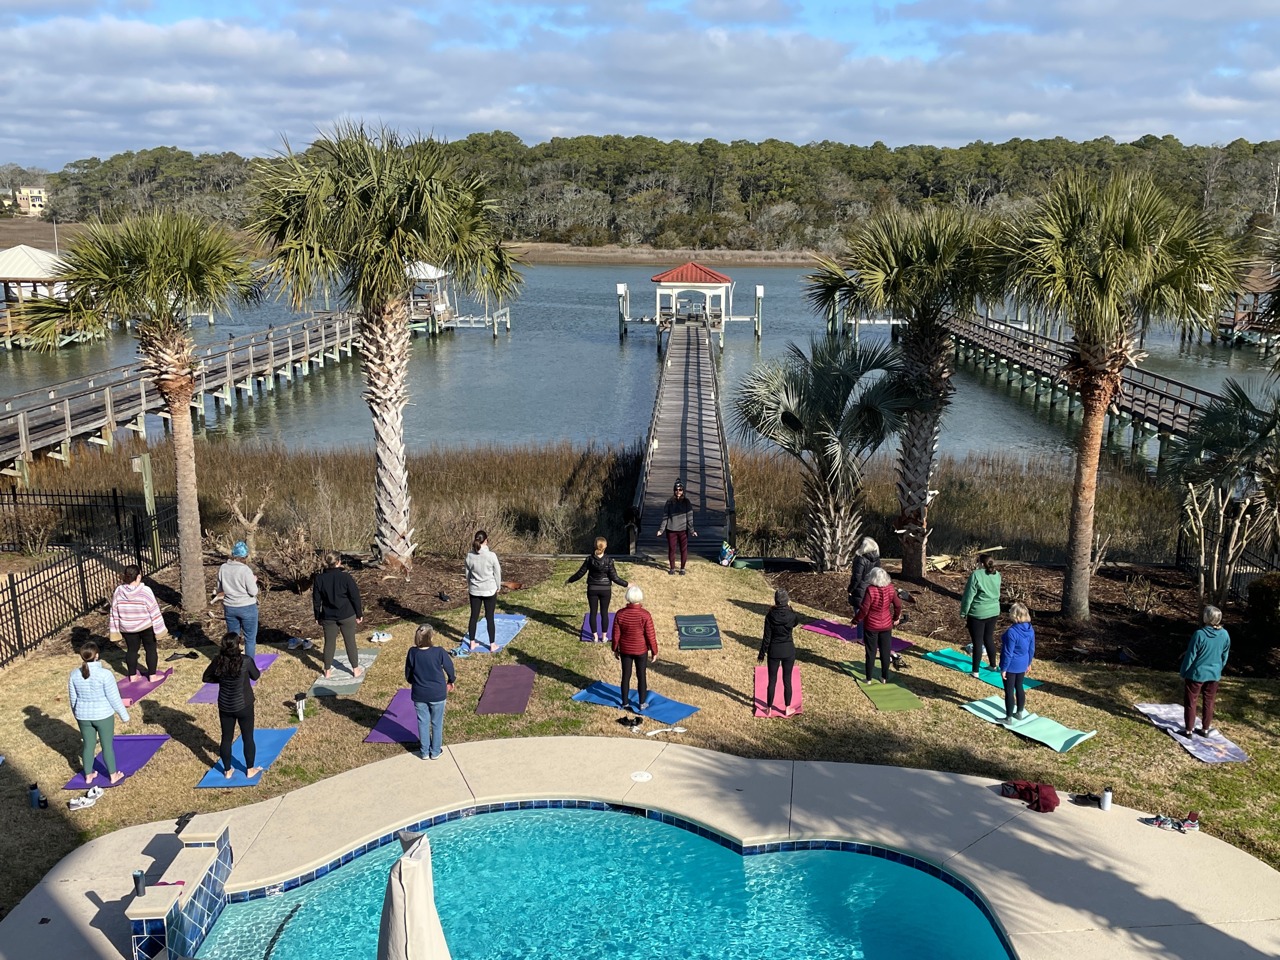 Outdoor yoga class by a pool with a scenic view of a pier and waterway, designed as part of a women's retreat to foster connection and rest.